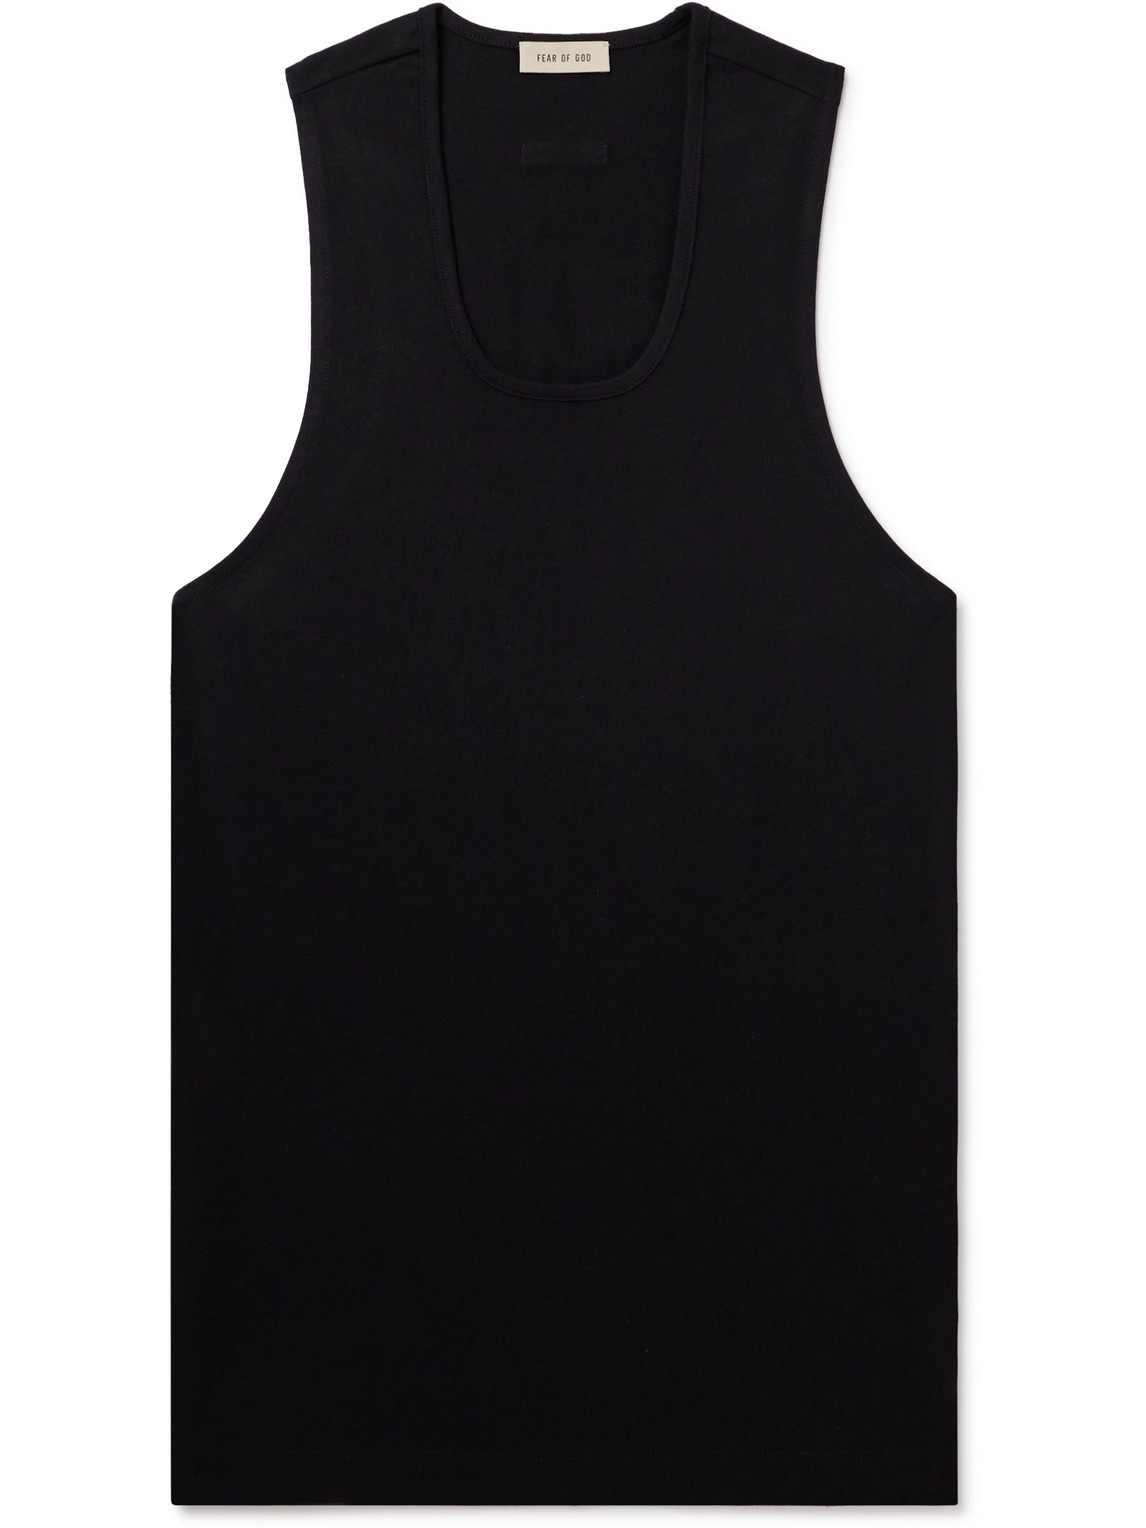 FEAR OF GOD COTTON-JERSEY TANK TOP